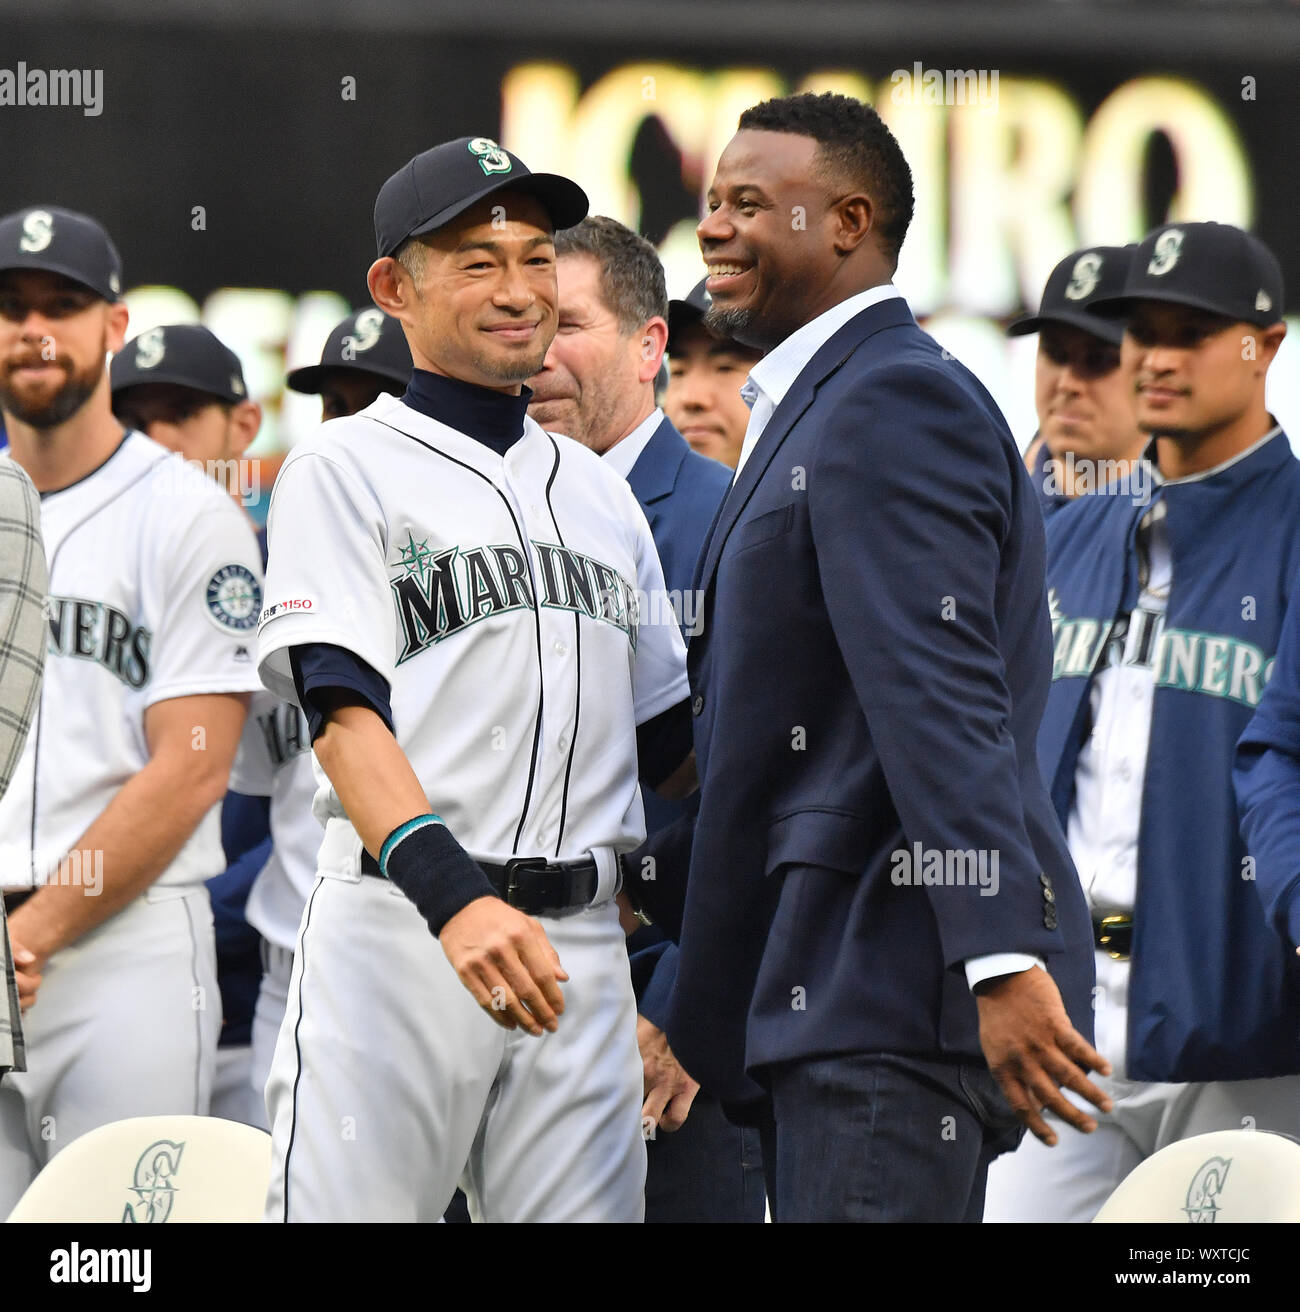 Ichiro Suzuki to join Ken Griffey Jr. and other former stars in Mariners  Hall of Fame - The Japan Times